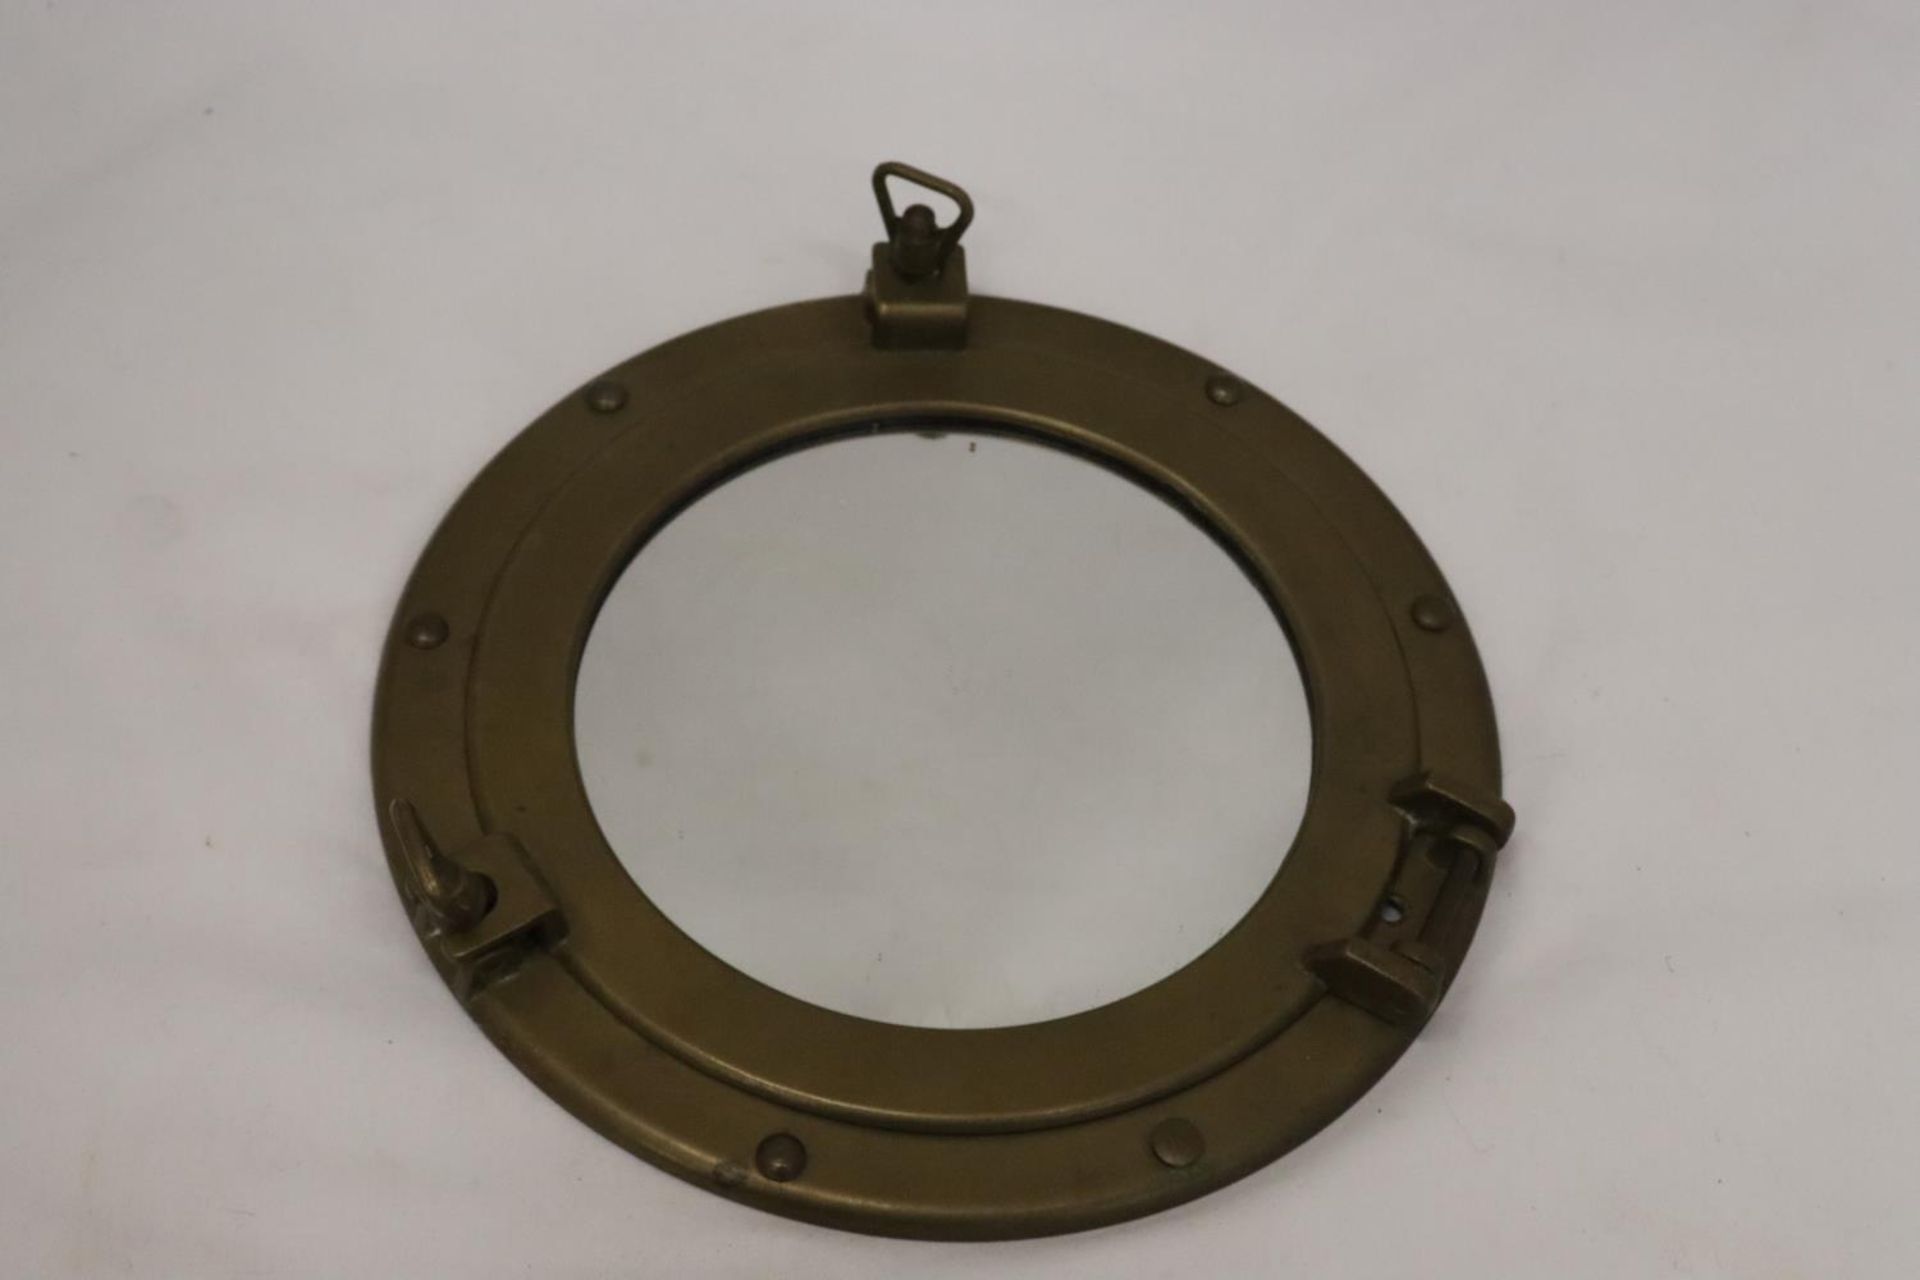 A BRASS PORTHOLE MIRROR WITH TWO WOODEN FRAMES - Image 8 of 9